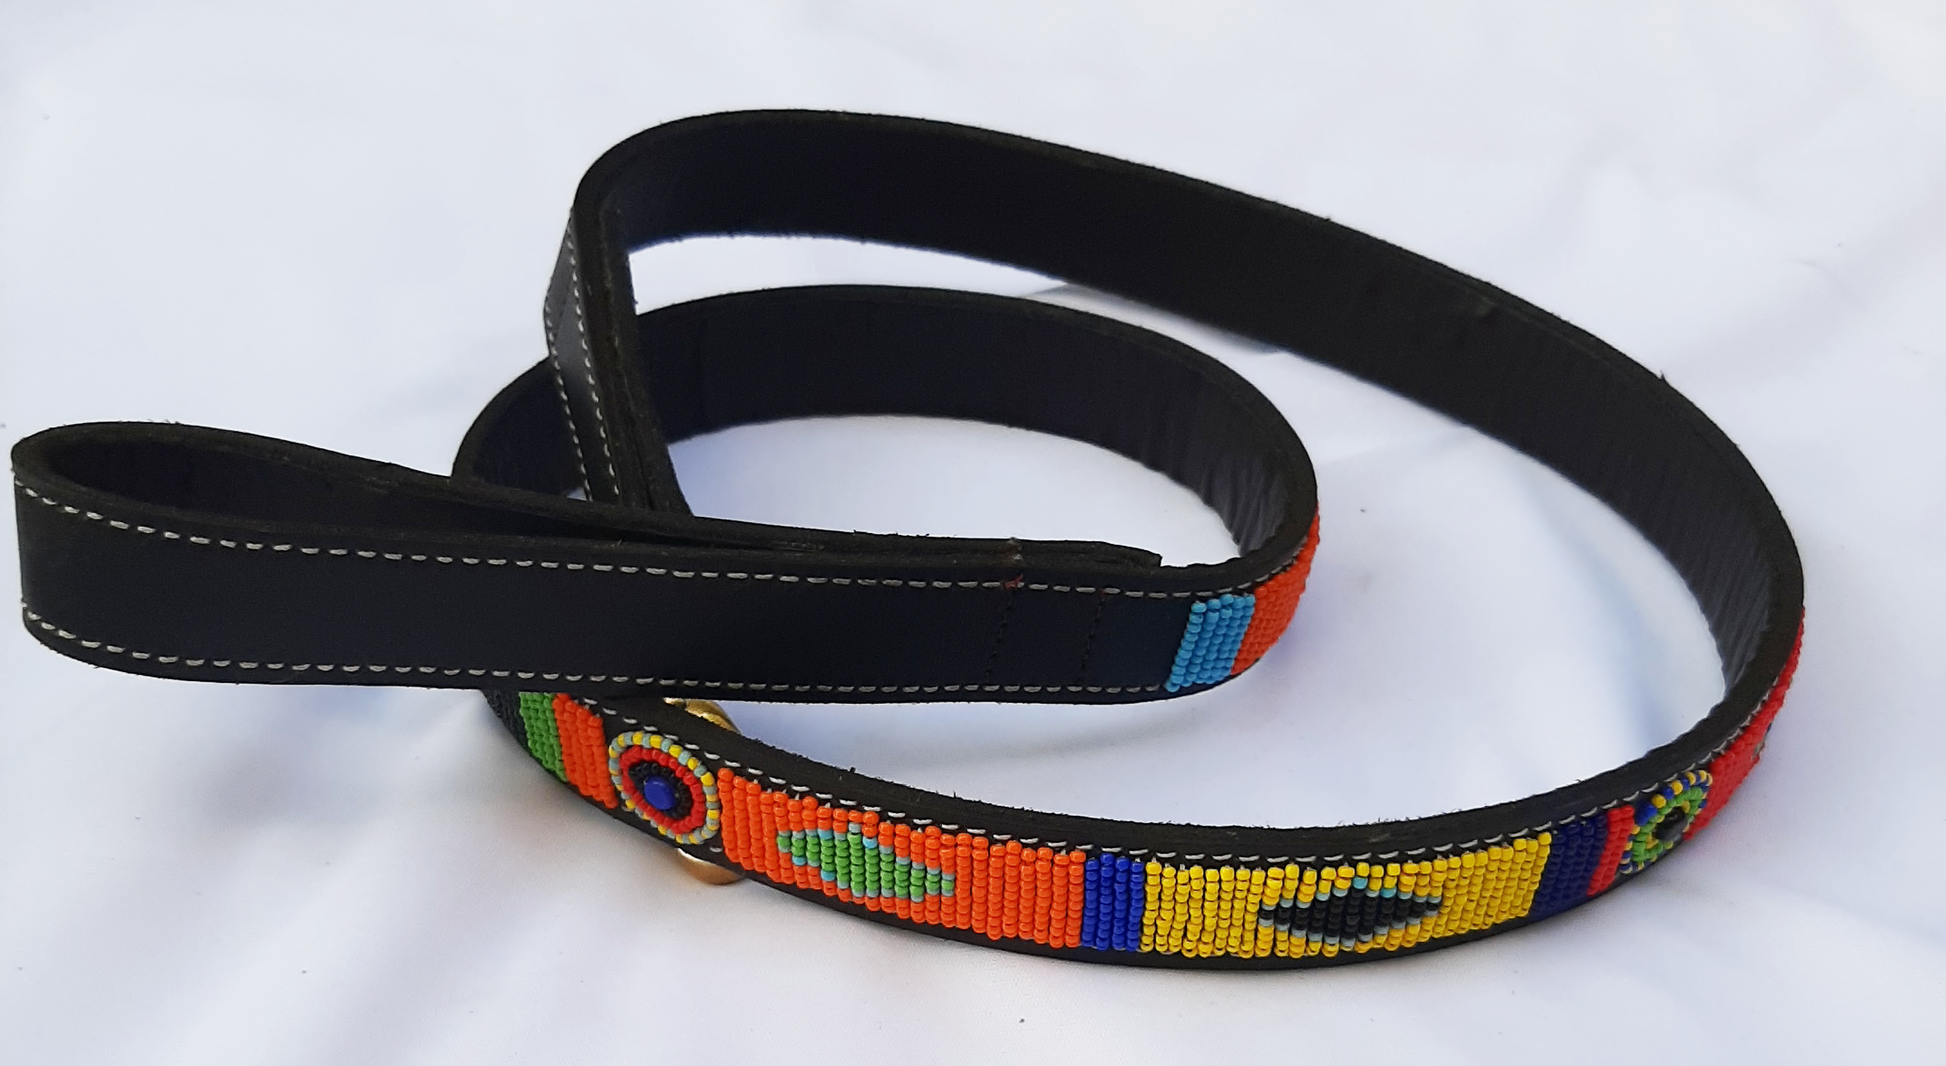 Dog leash with lining - Authentic African handicrafts | Clothing, bags, painting, toys & more - CULTURE HUB by Muthoni Unchained